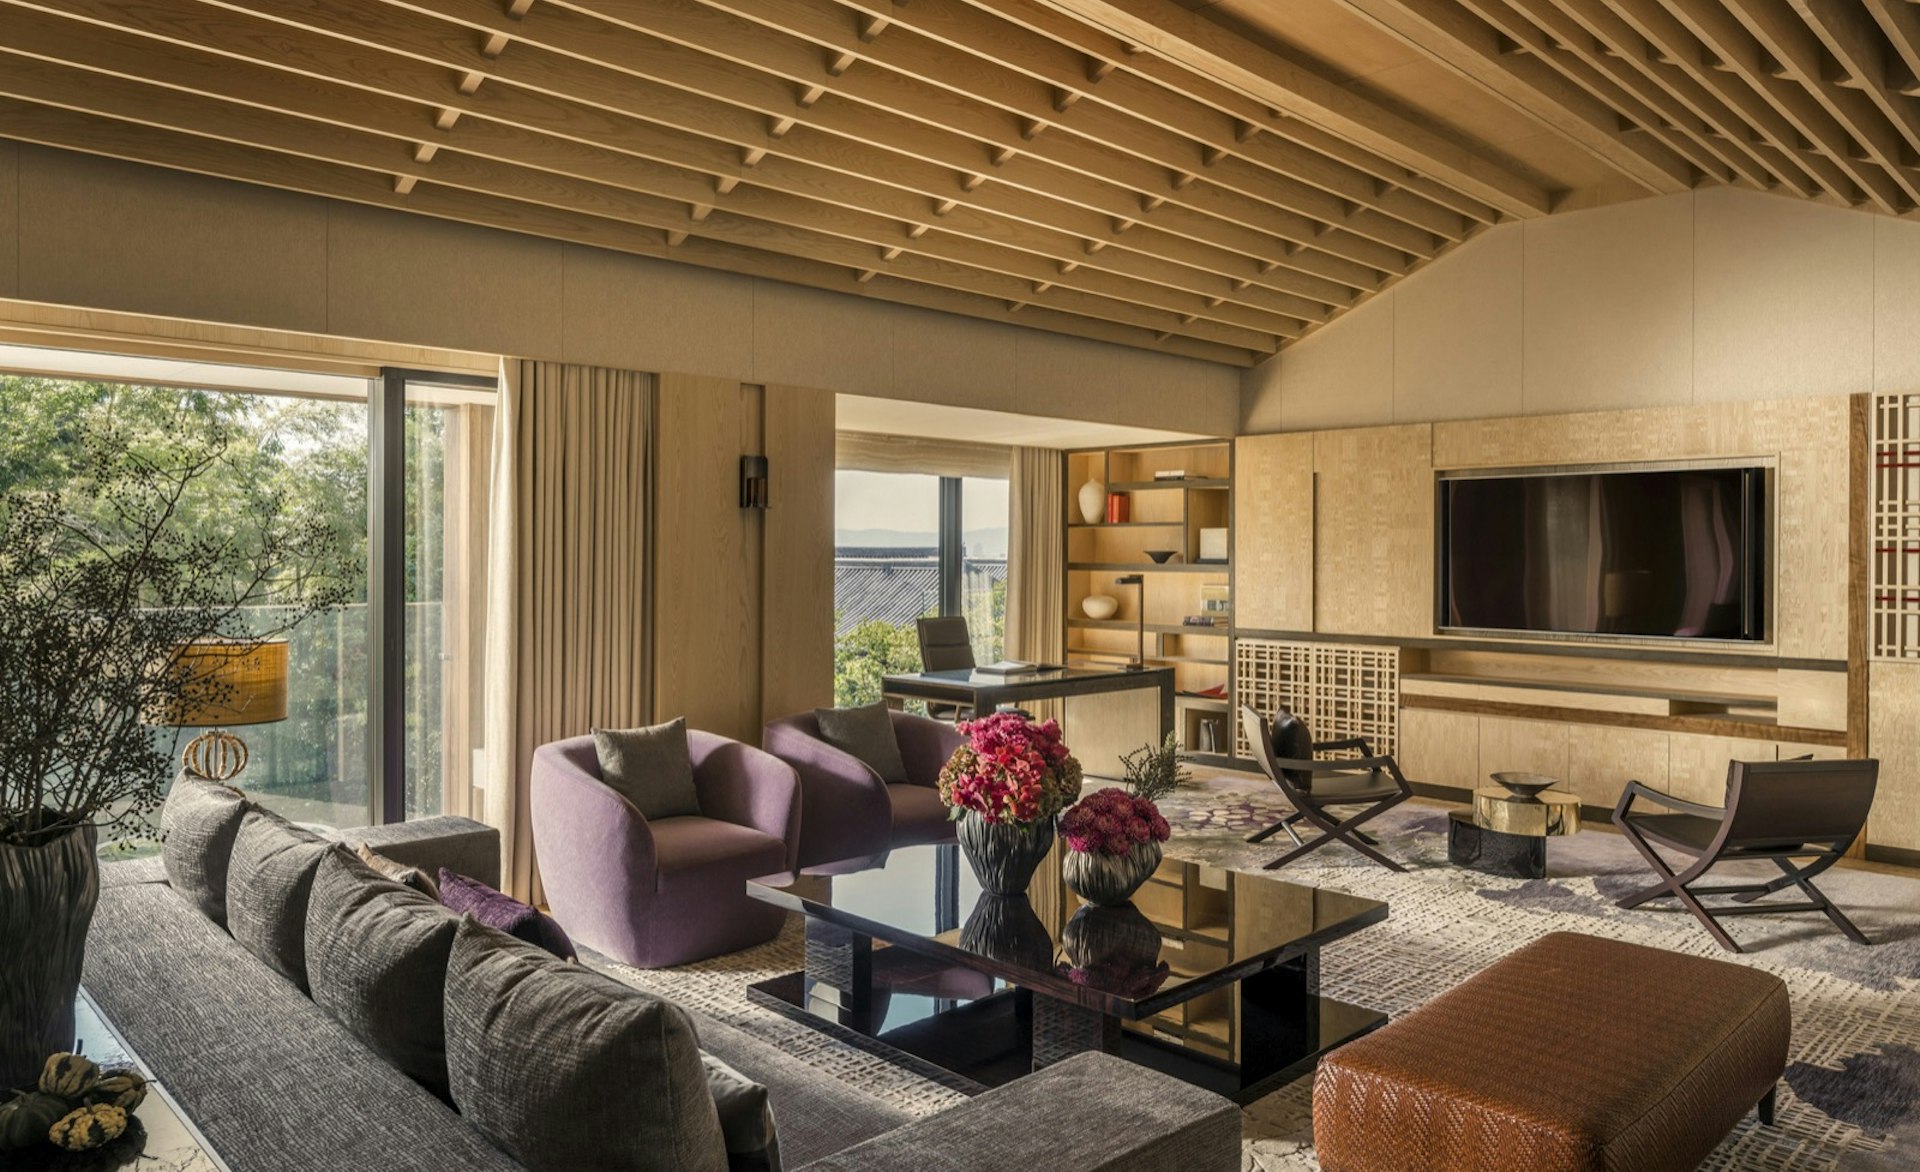 The living area of the Four Seasons Kyoto presidential suite, with Japanese-influence design and views over Japanese rooftops